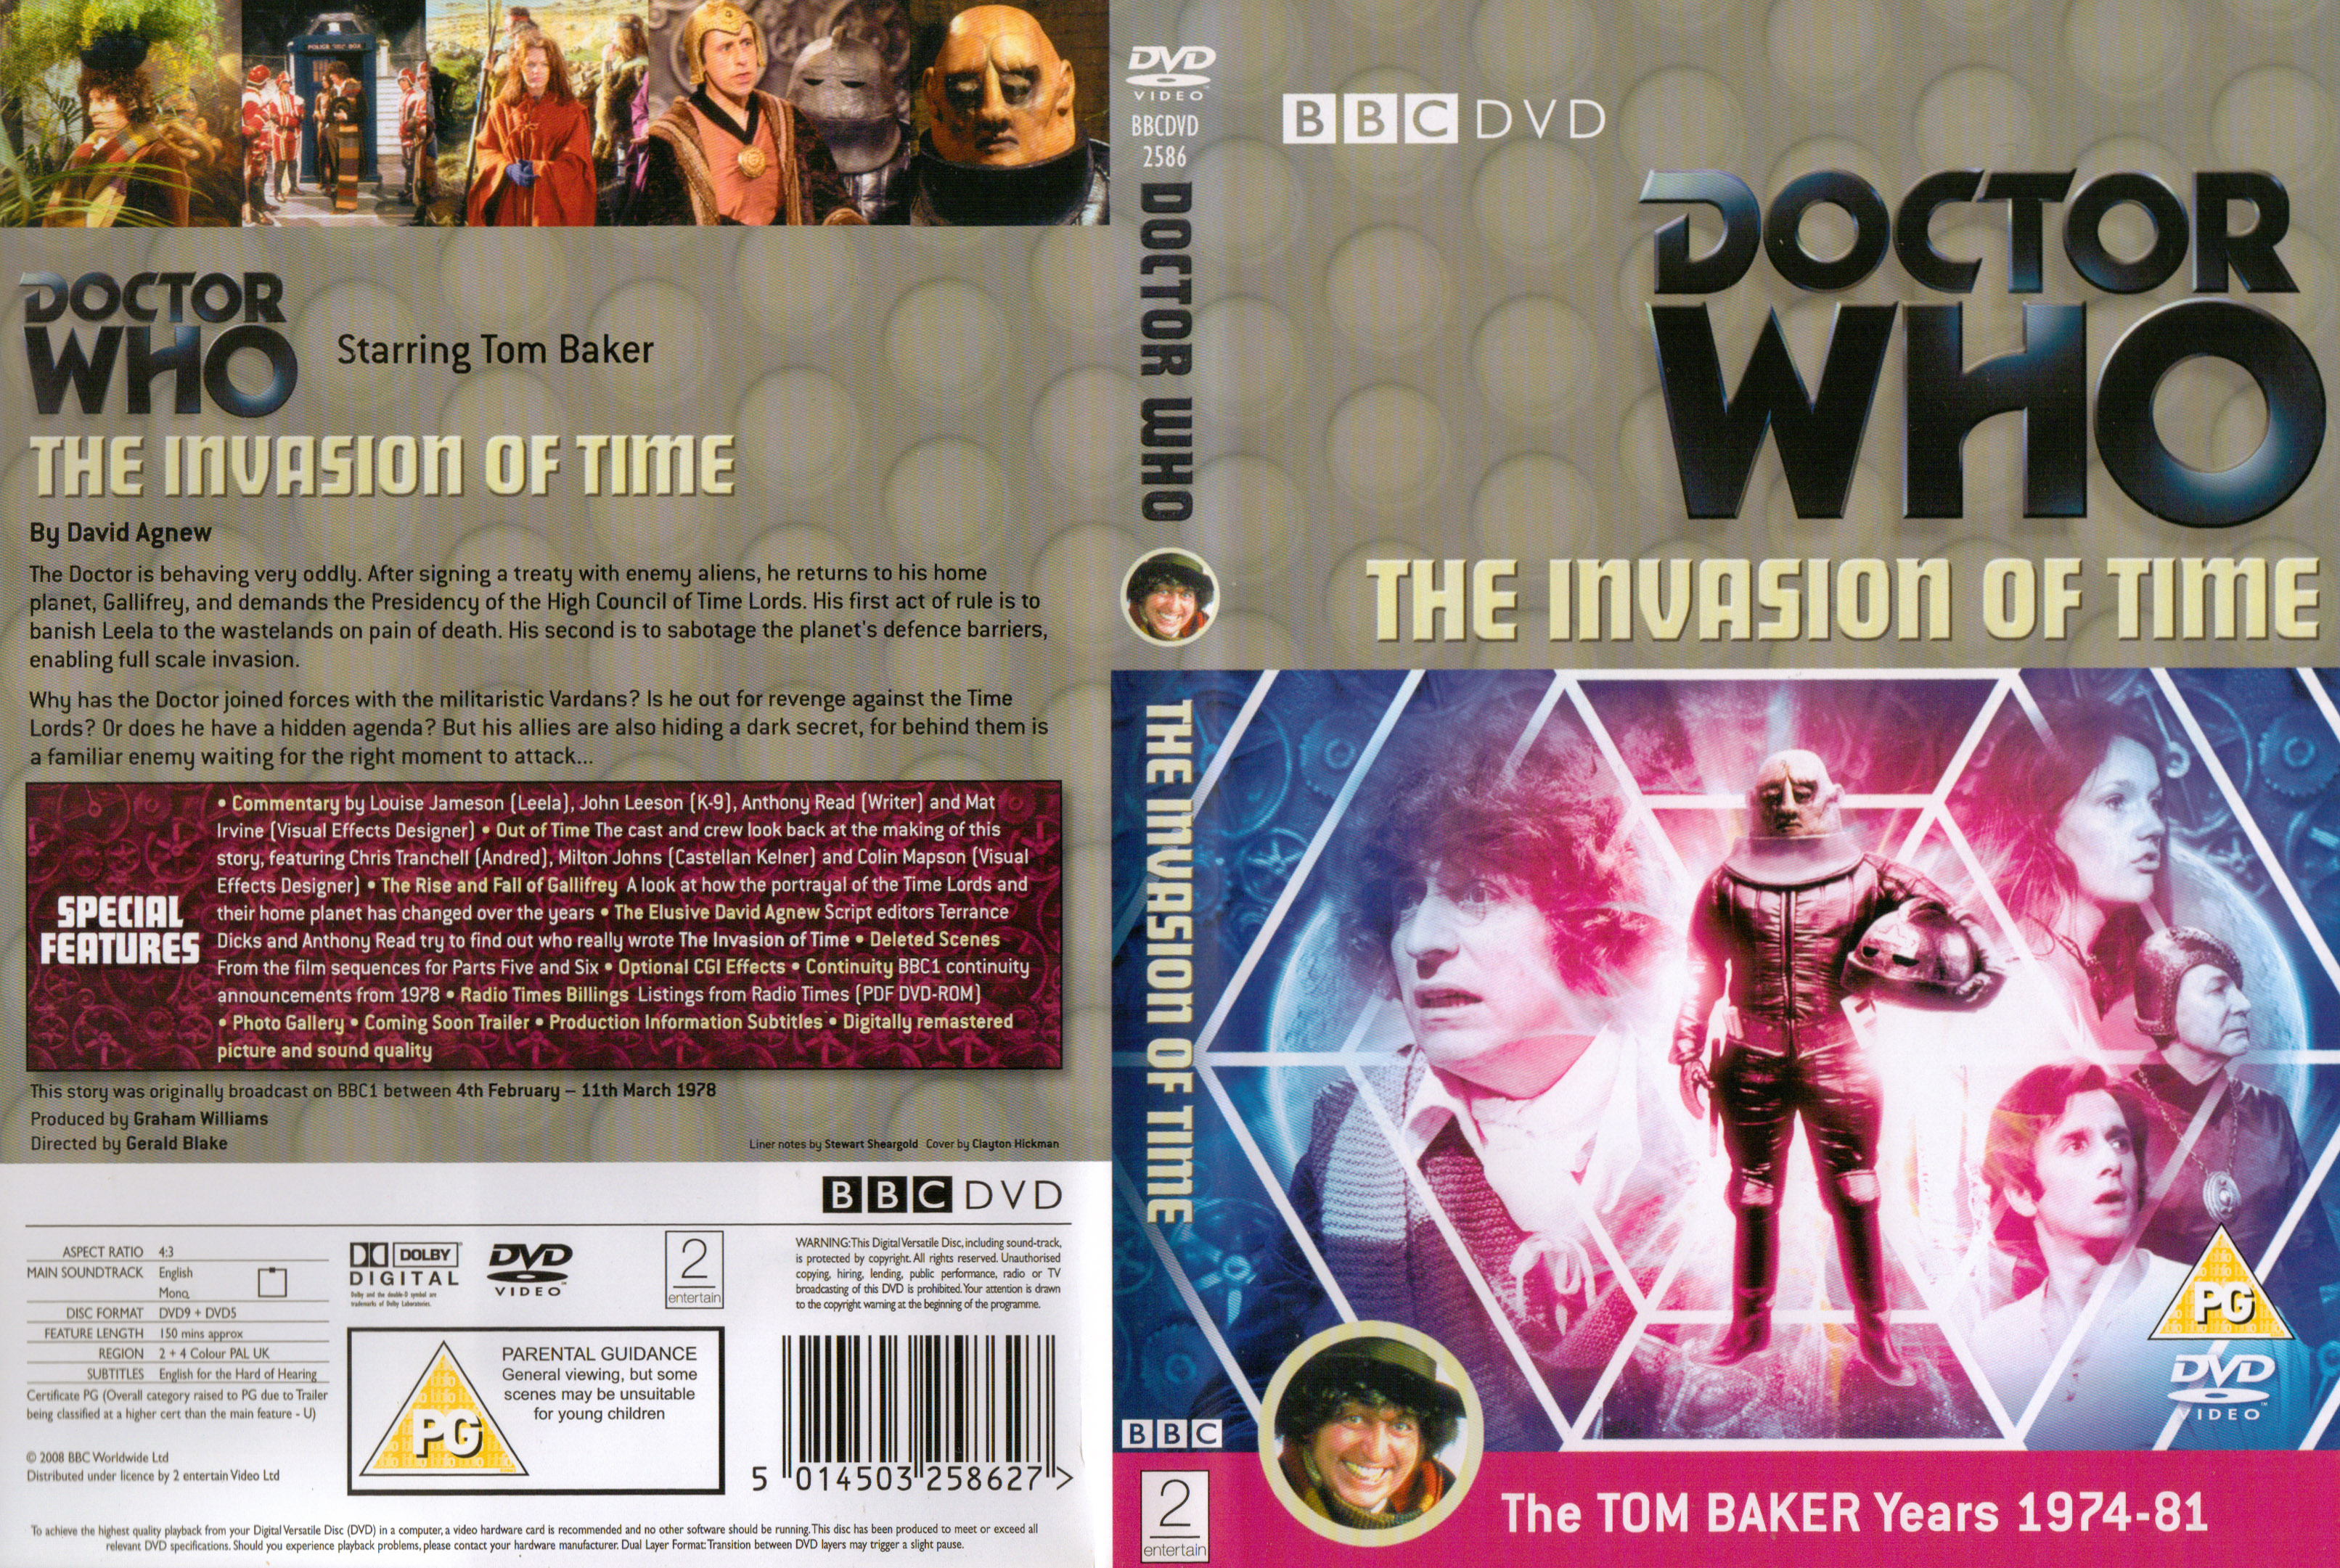 The Invasion of Time